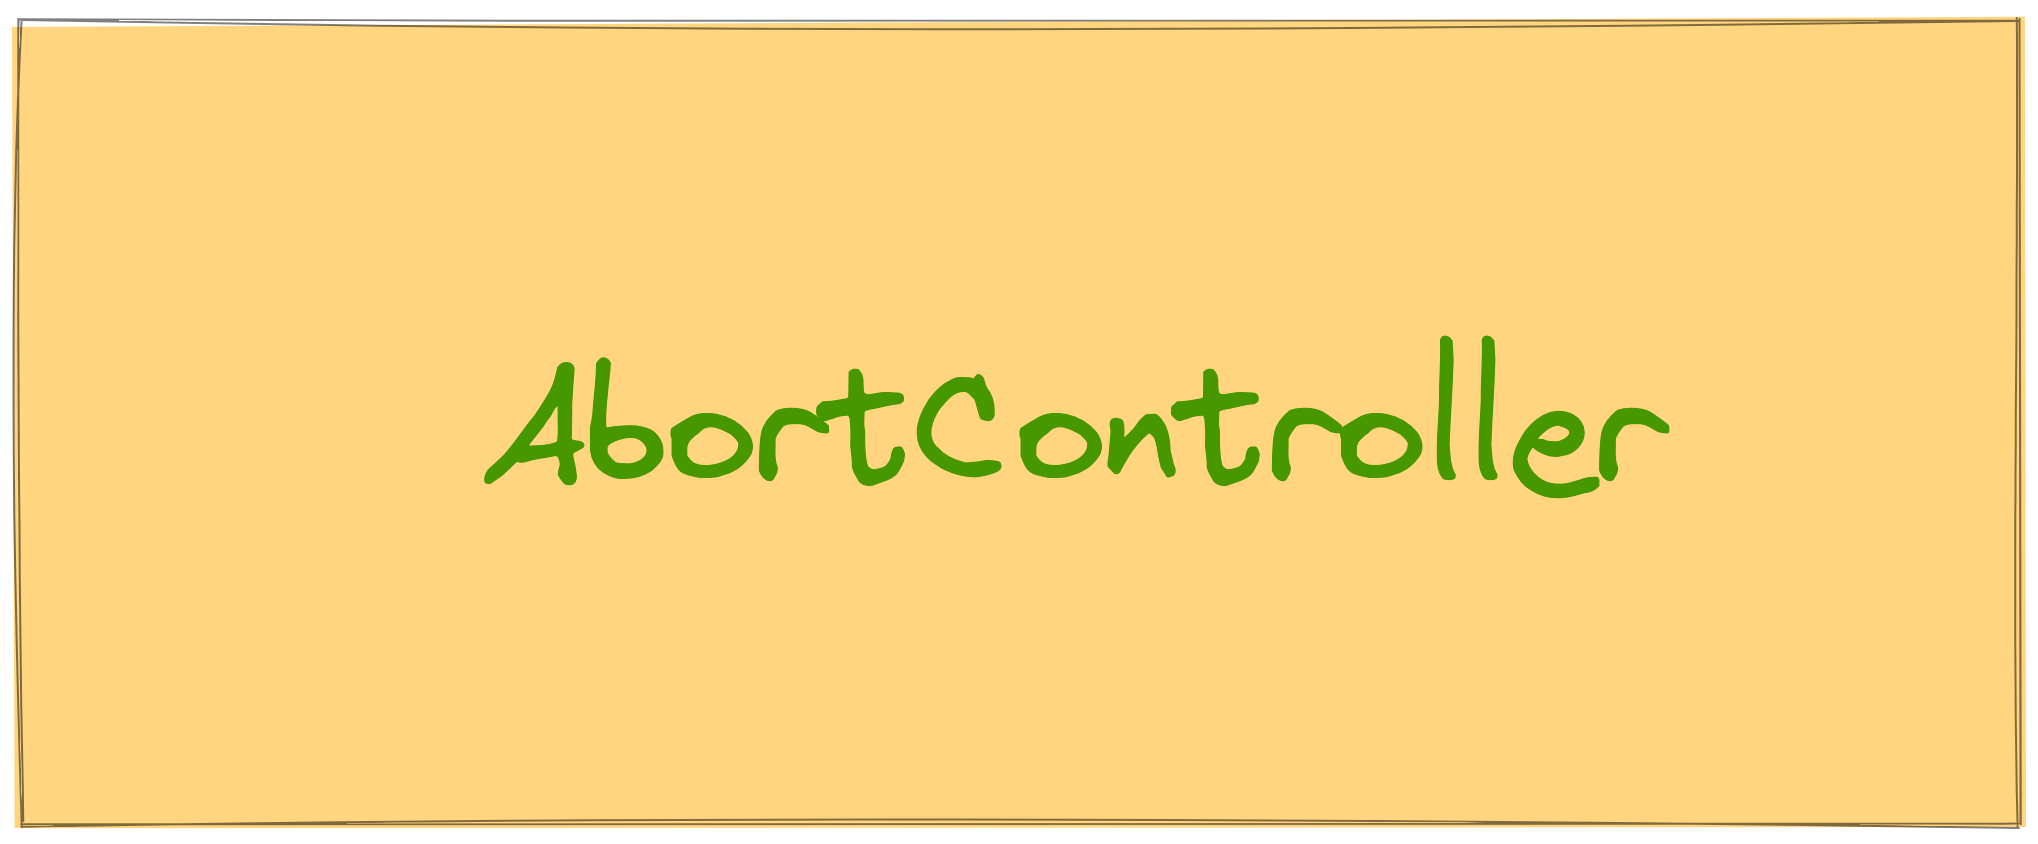 Best practices for using AbortController